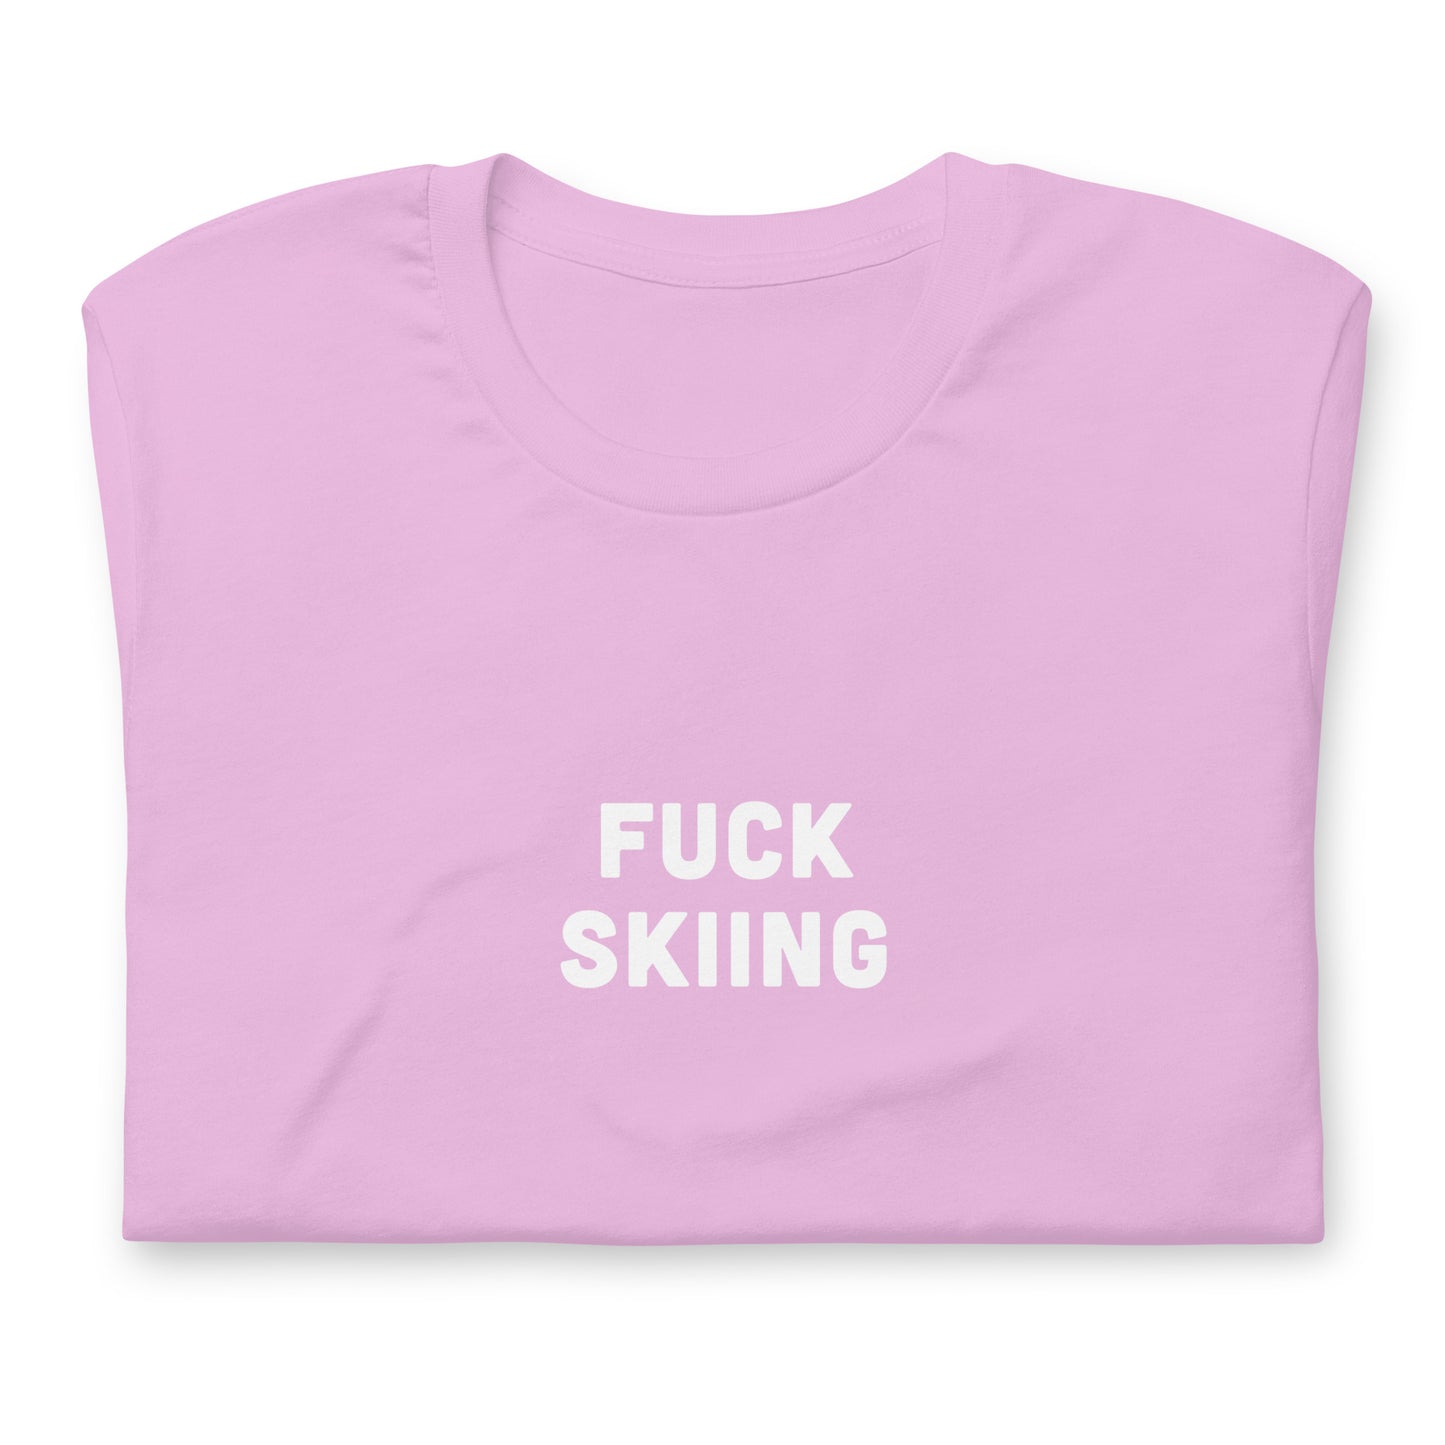 Fuck Skiing T-Shirt Size 2XL Color Forest